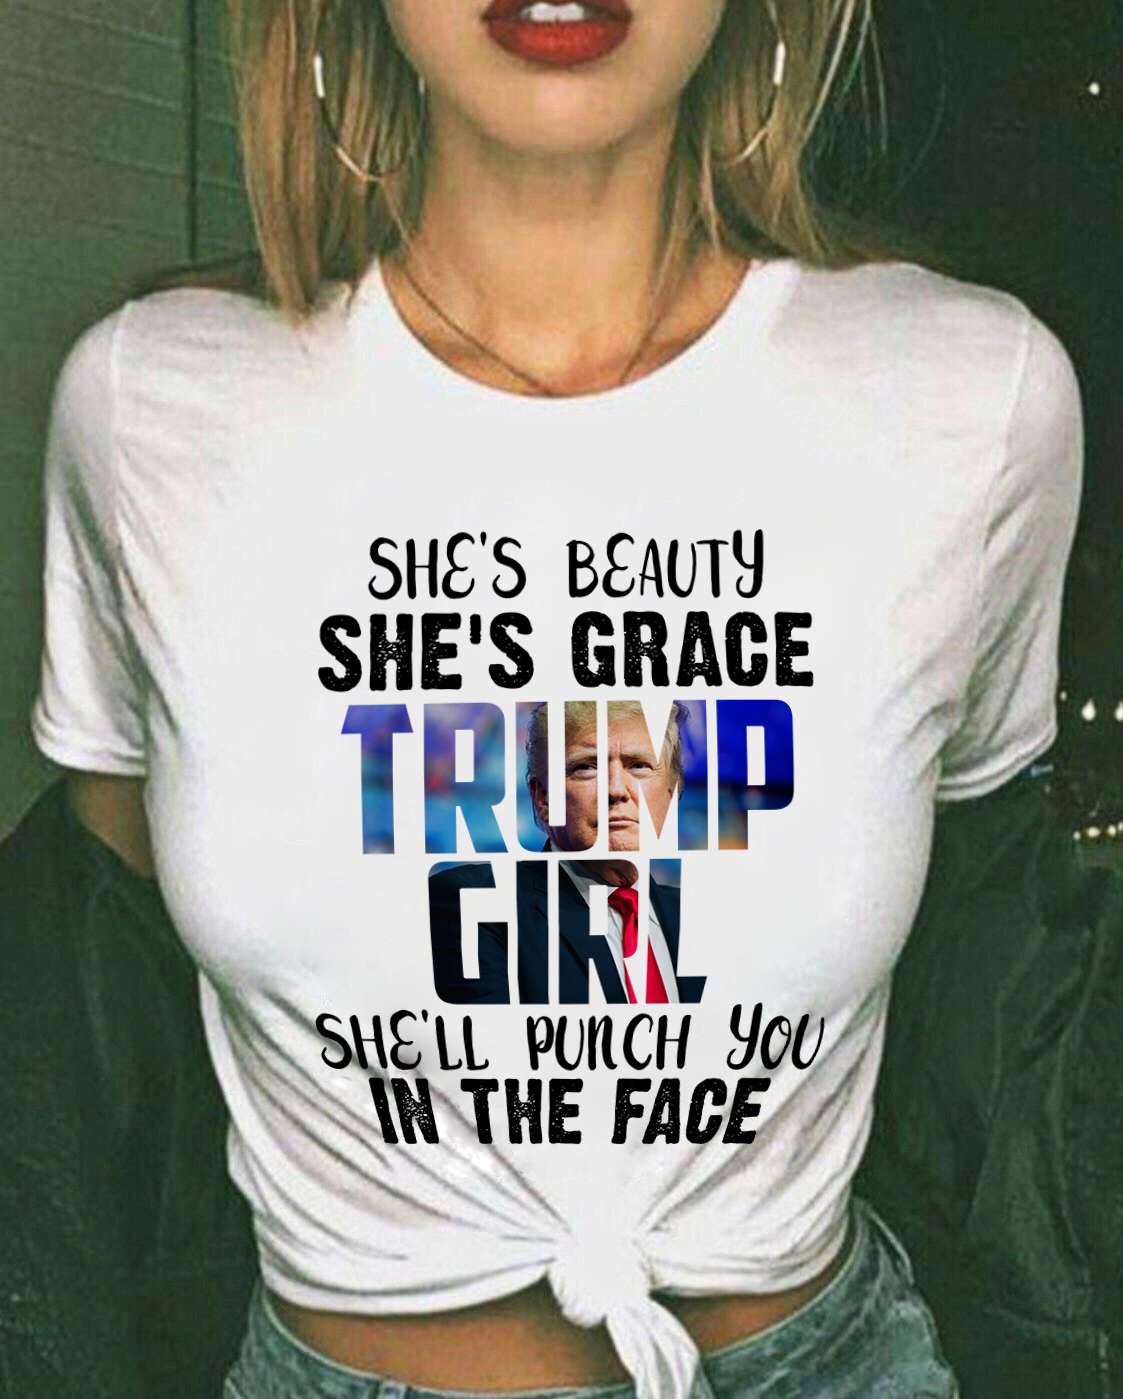 She's beauty she's grace Trump girl she'll punch you in the face - Donald Trump supporter